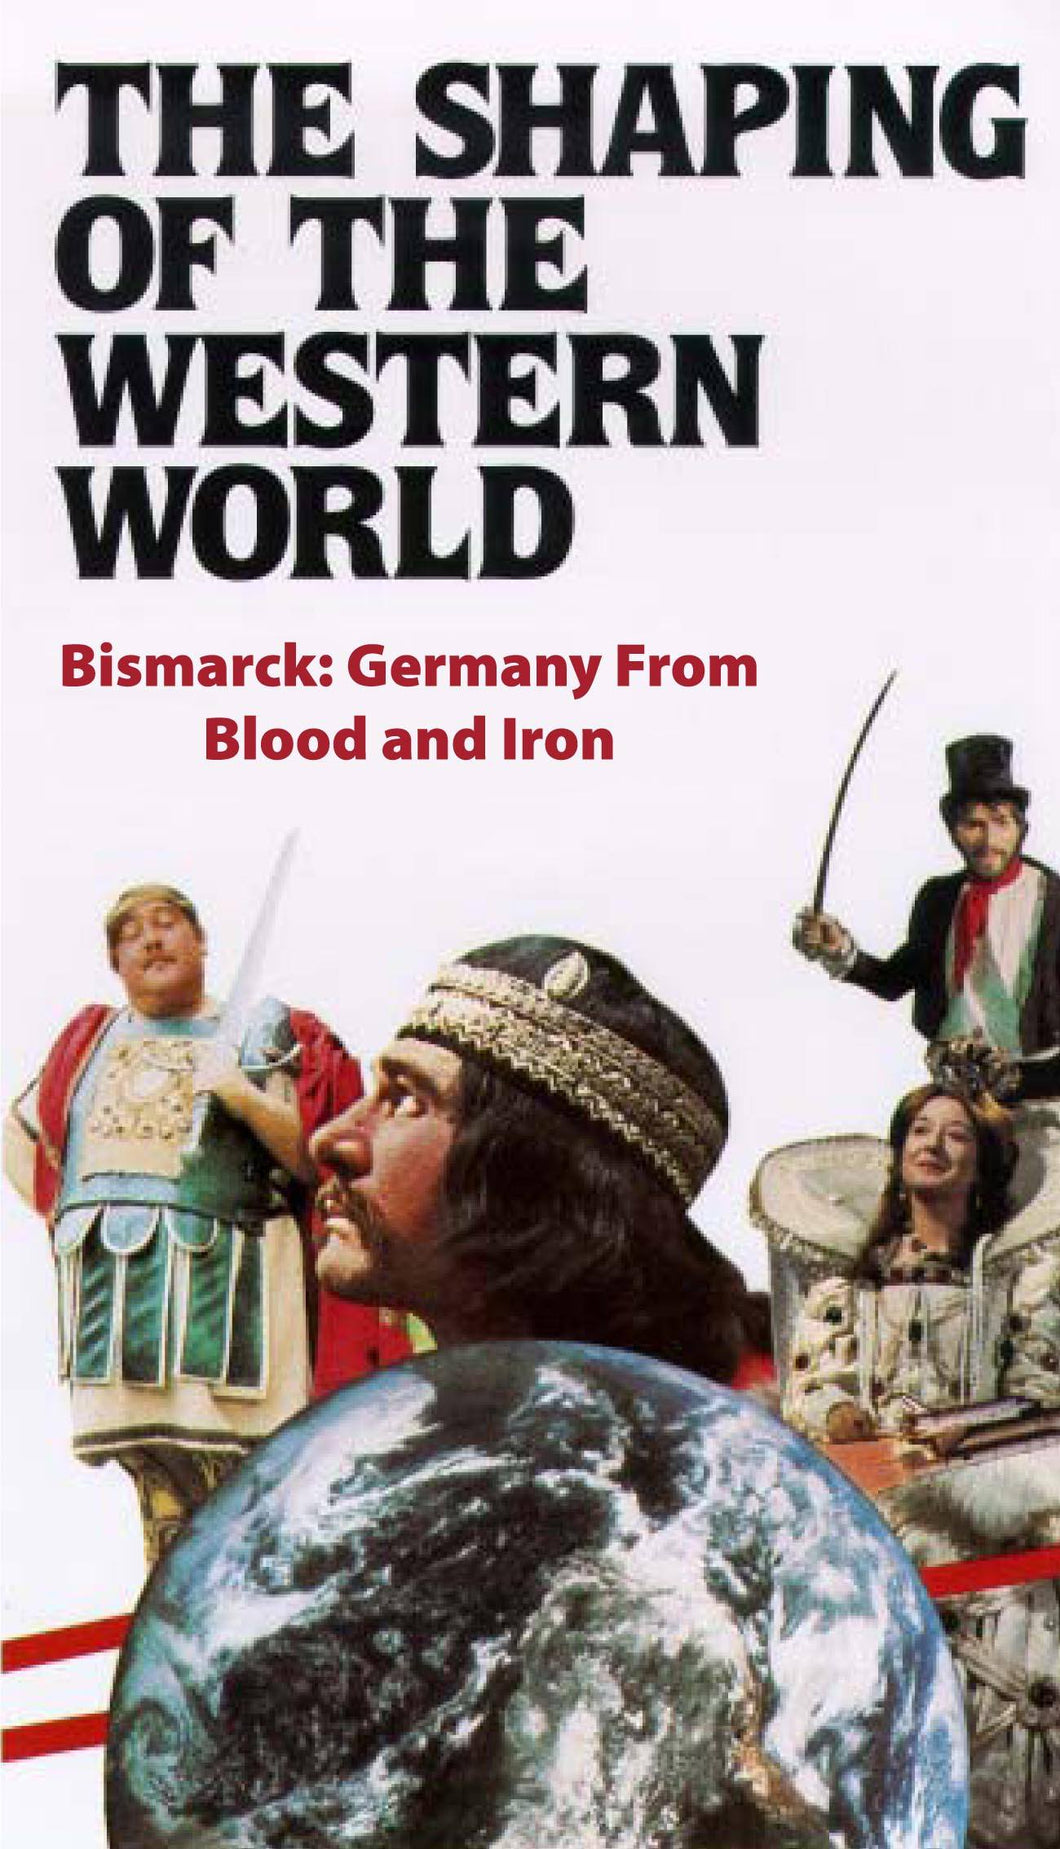 Bismarck: Germany From Blood and Iron